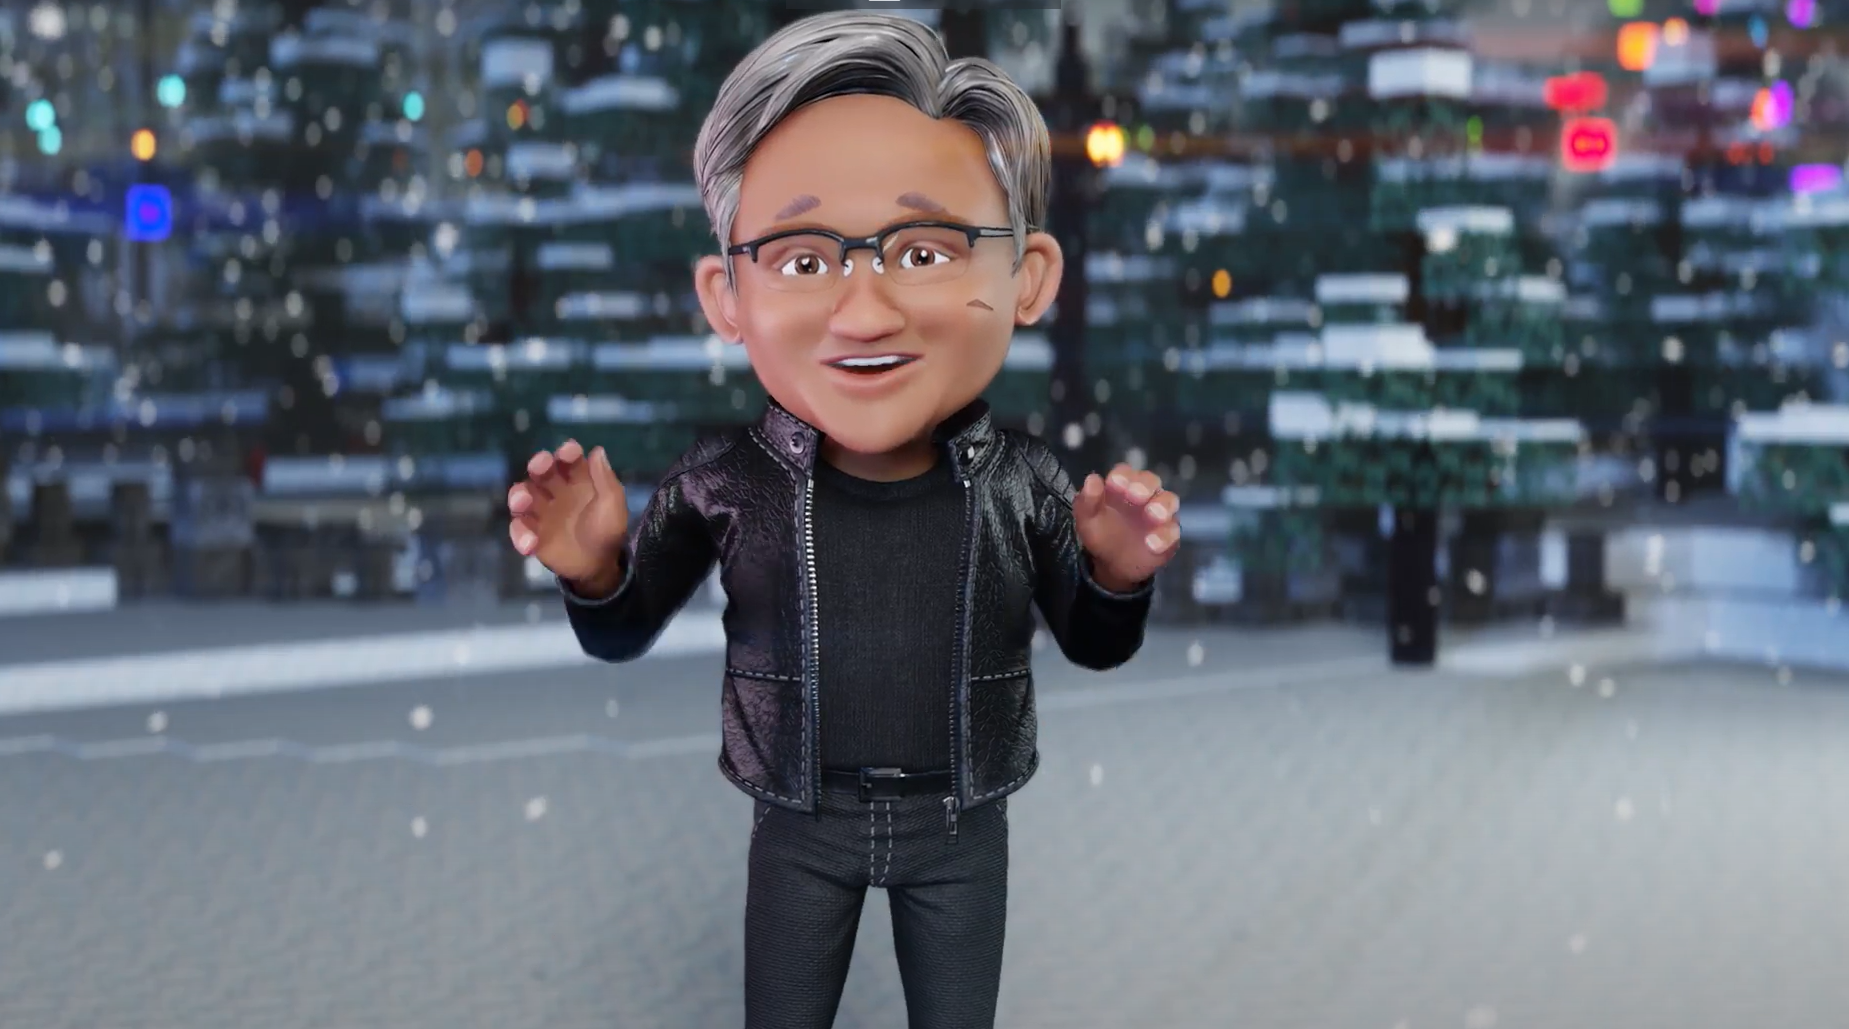 Toy Jensen Rings in Holidays With AI-Powered ‘Jingle Bells’